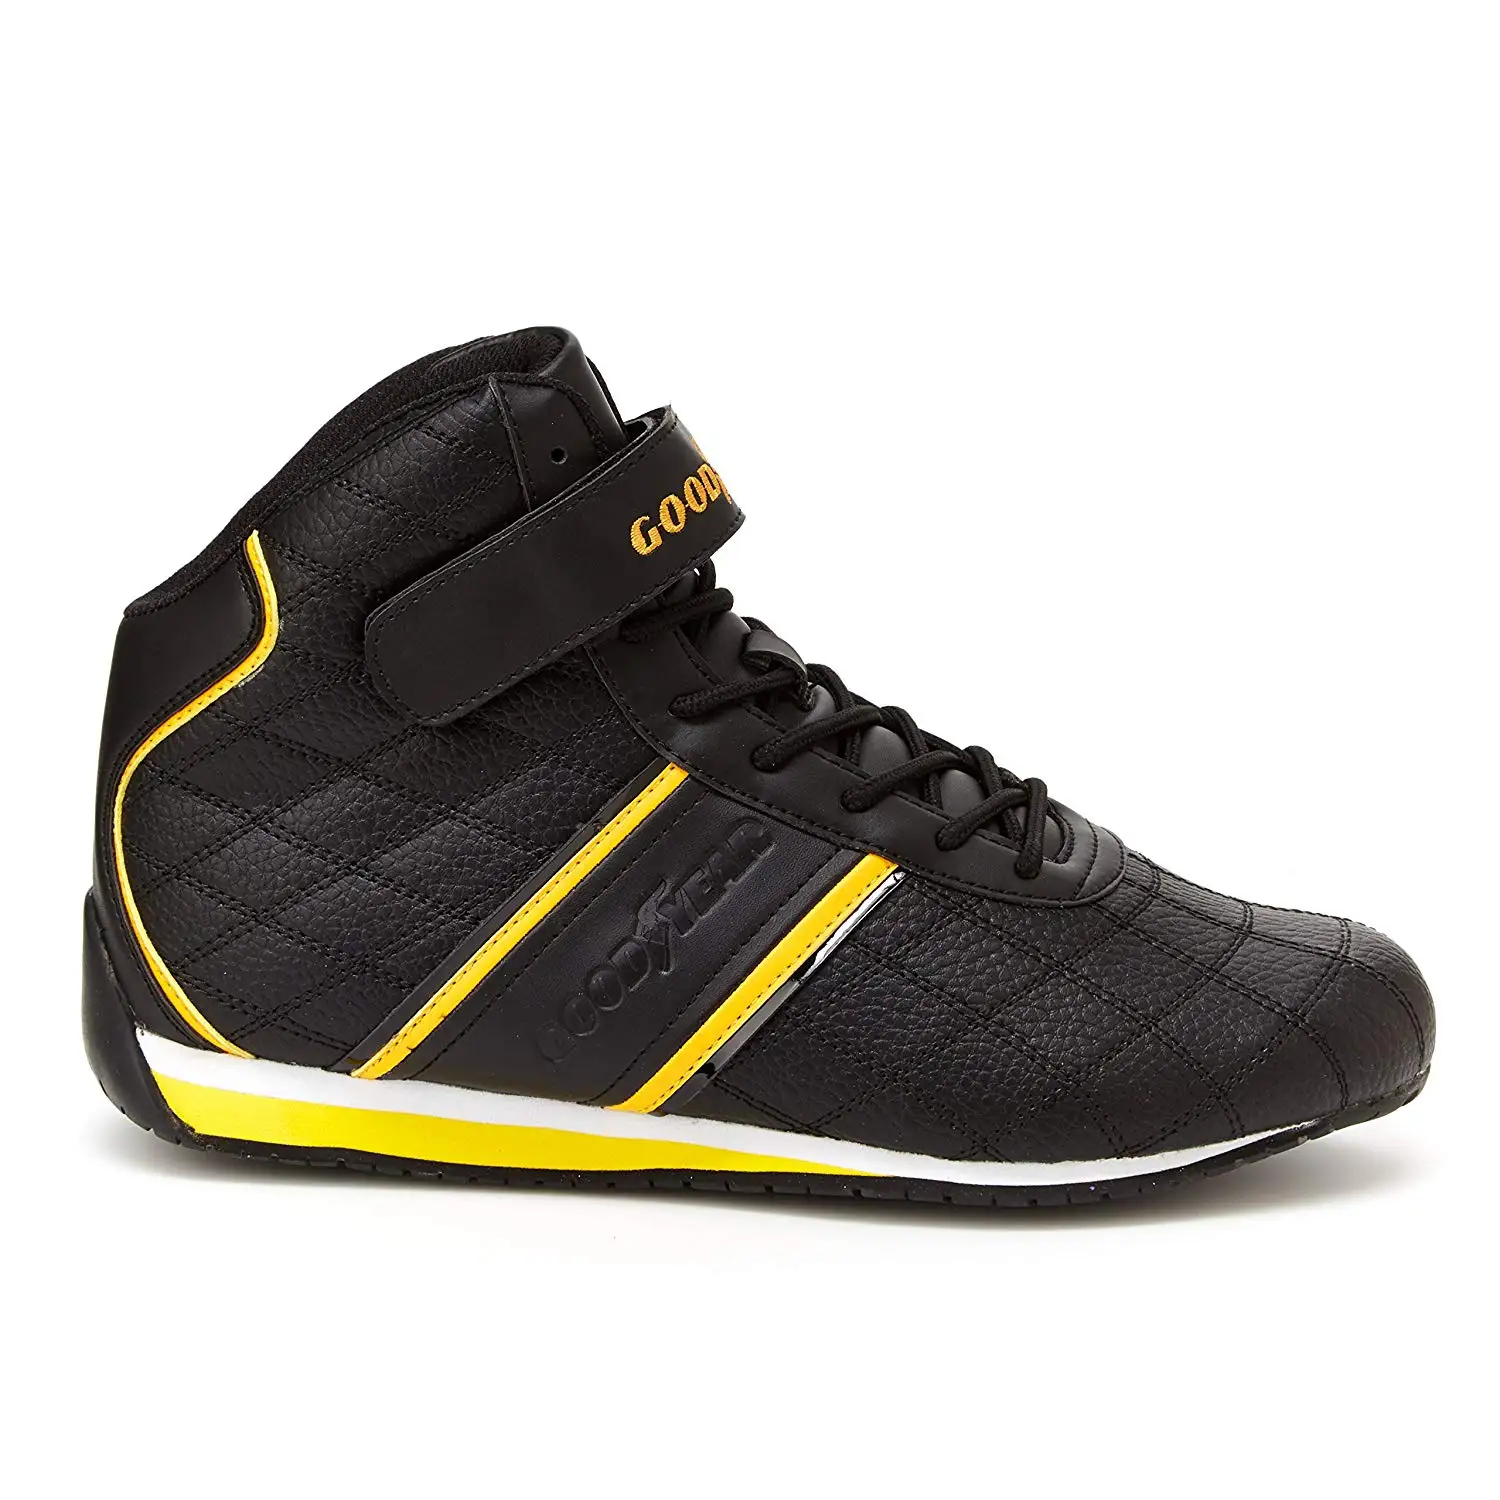 adidas goodyear shoes high tops